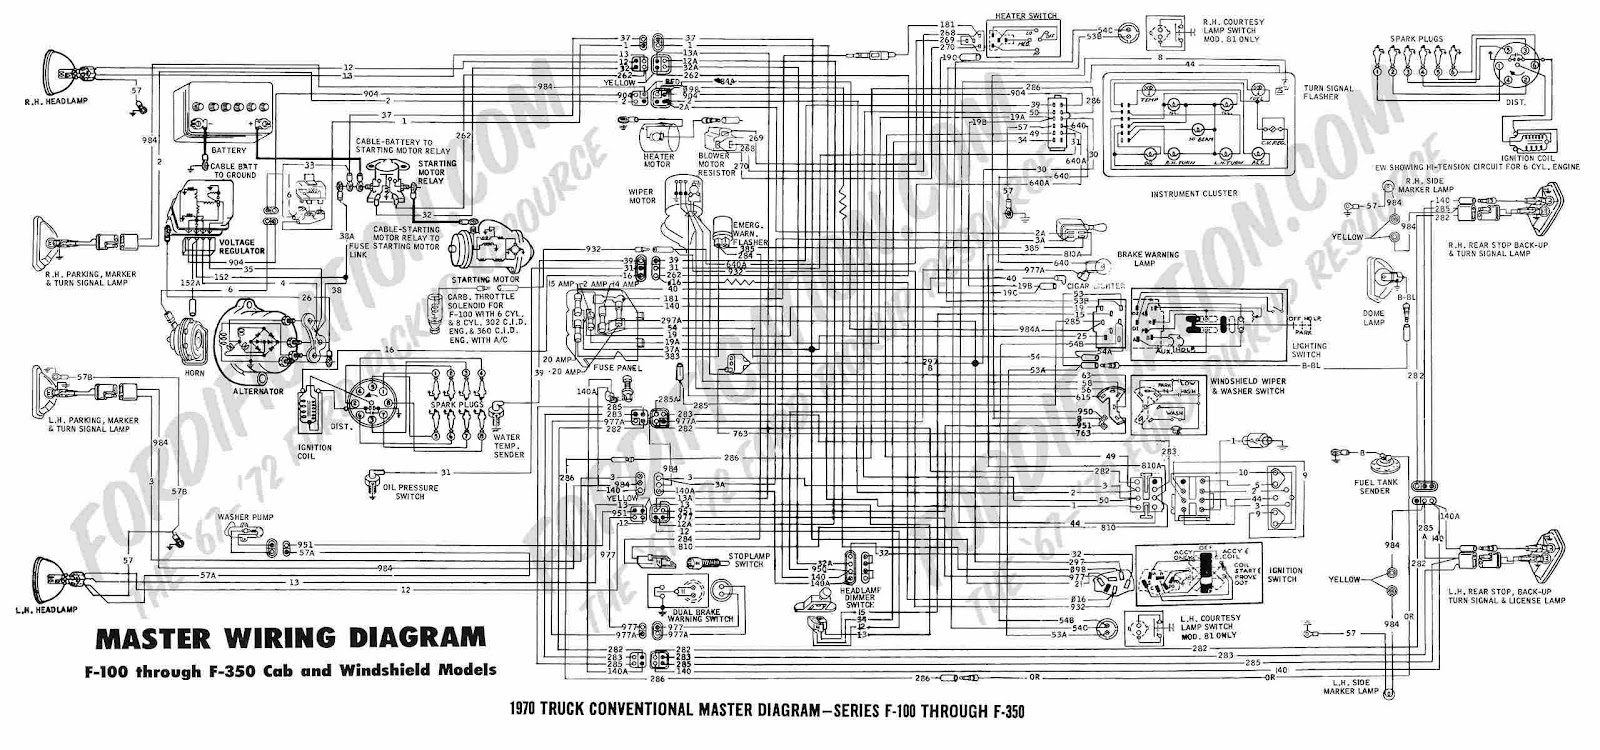 Ford F-100 through F-350 1970 Truck Master Wiring Diagram | All about